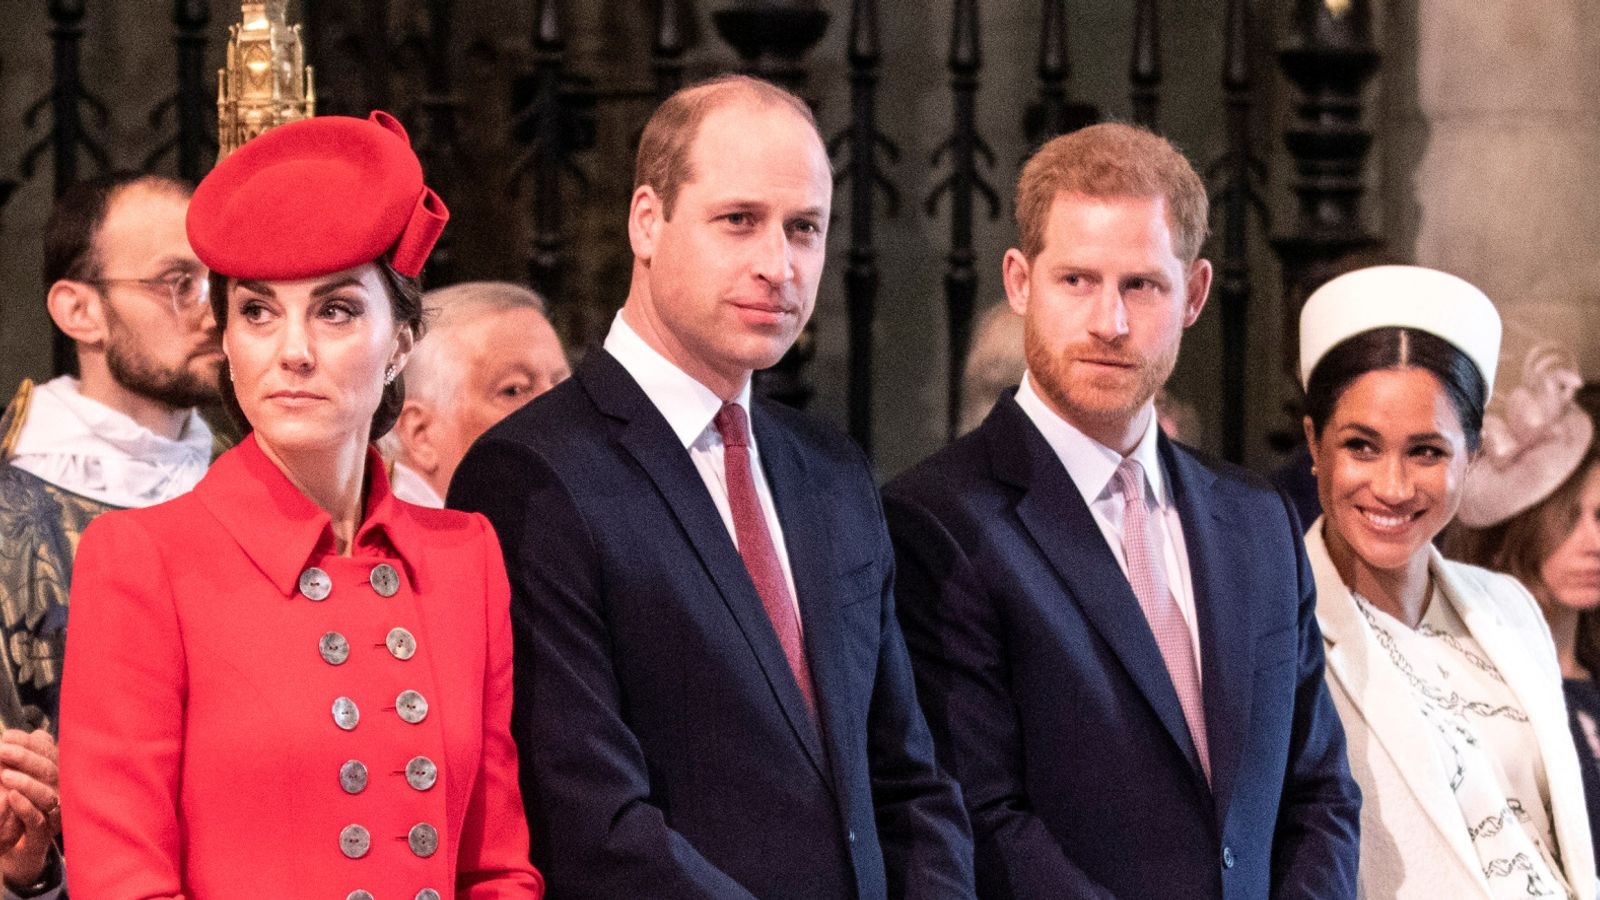 Royal Family LIVE: 'Nonsense' Sussex fury as anger 'whipped up' against Kate and William